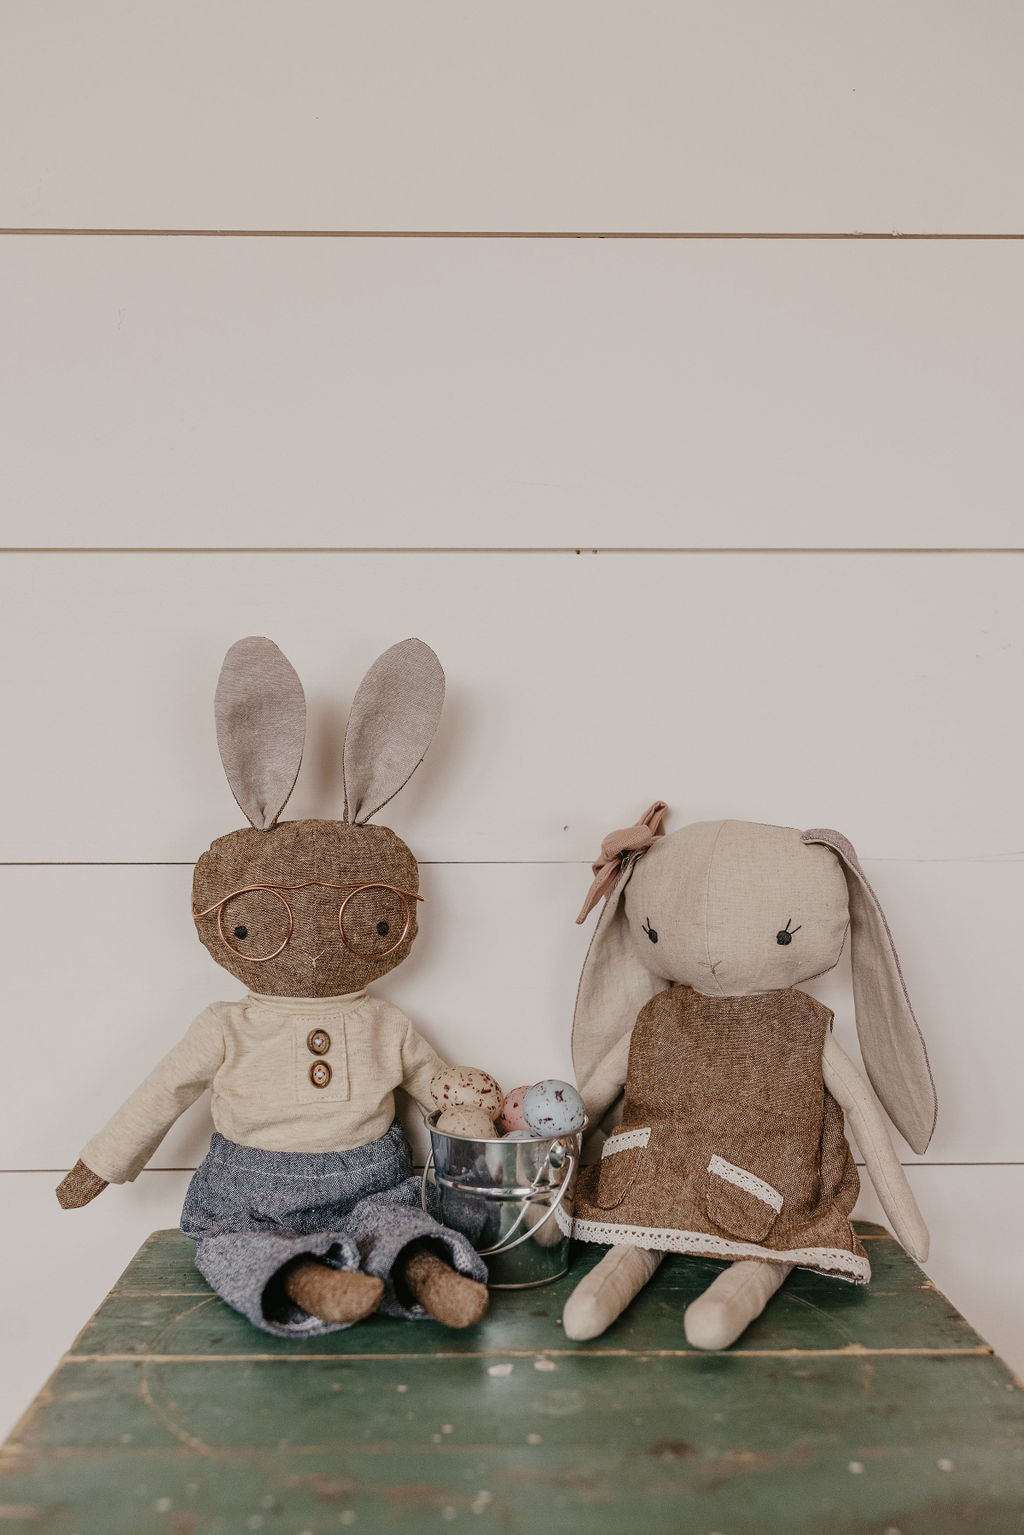 Bunny Doll (includes one outfit and one accessory)